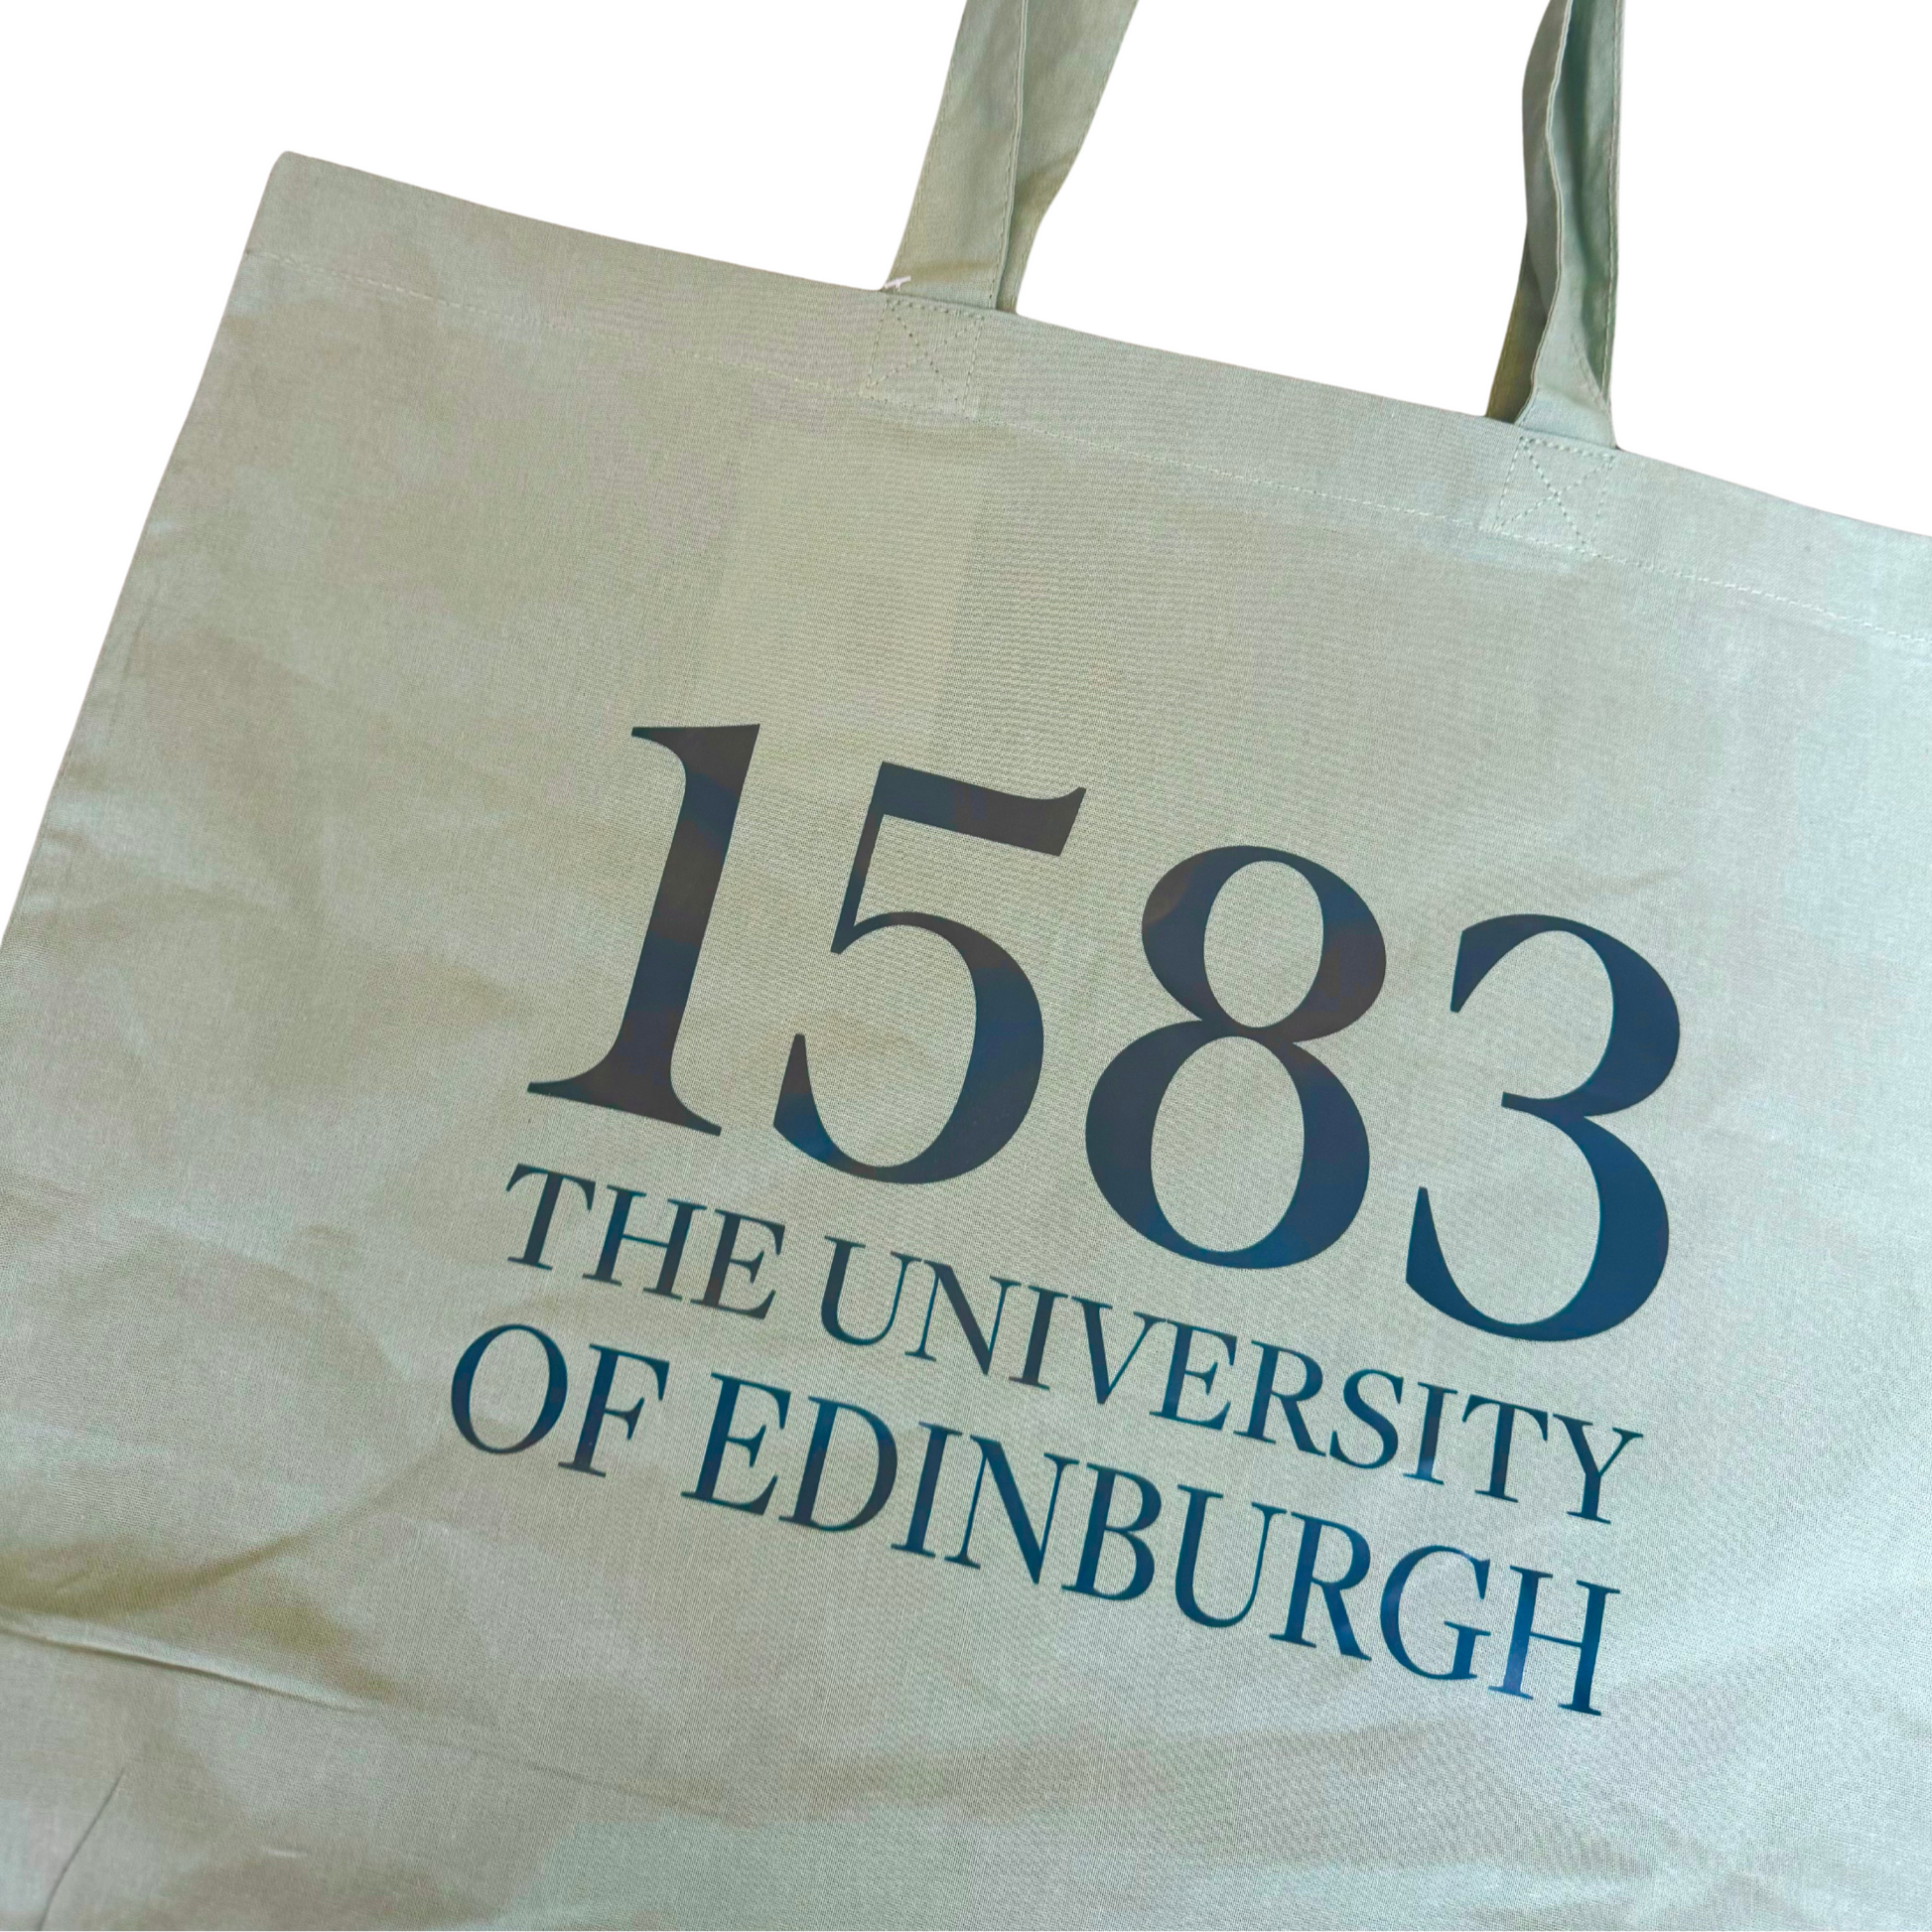 close-up of a Sage green tote bag with large text that says 1583 The University of Edinburgh